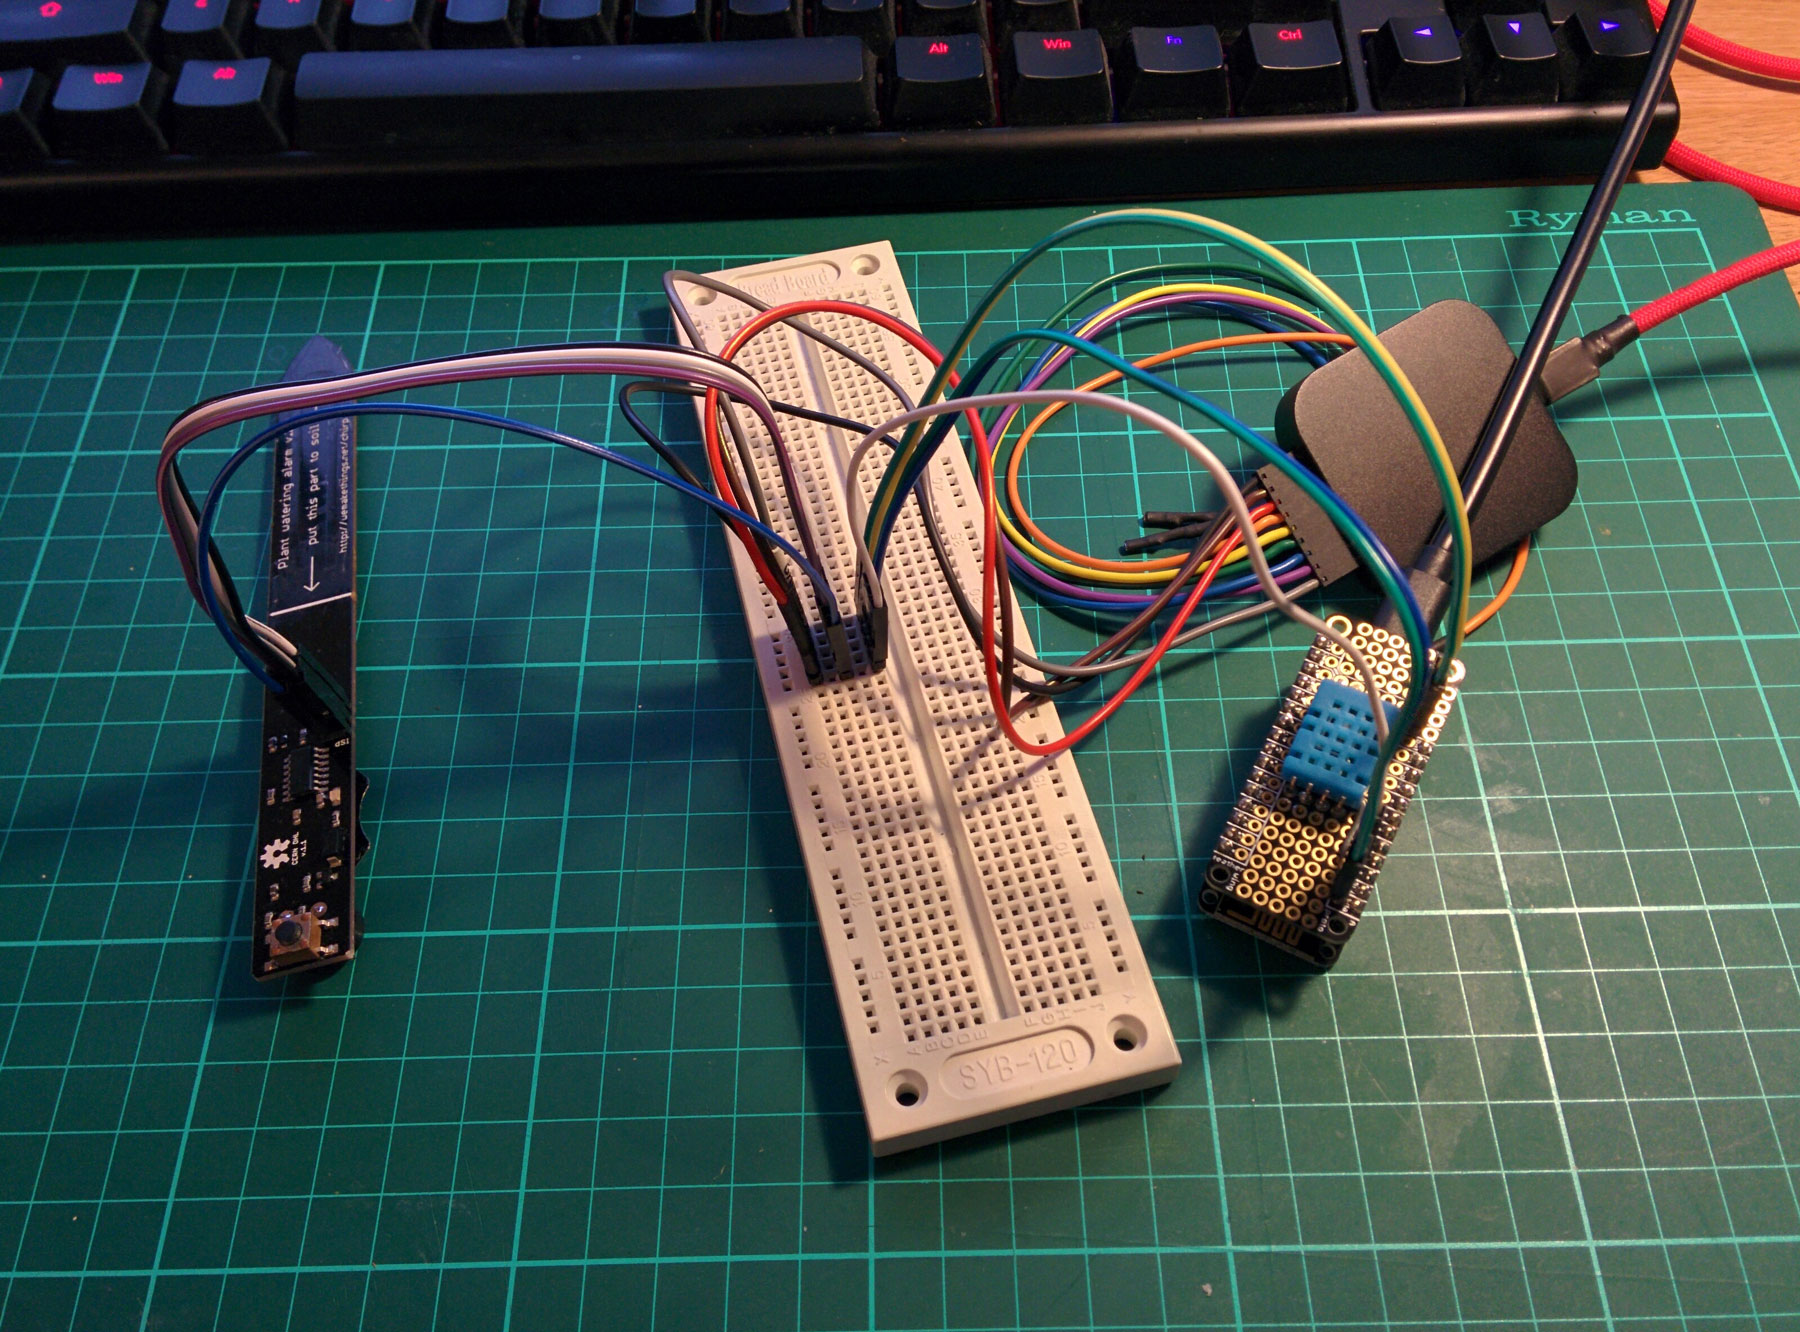 Monitoring houseplants with MQTT and the ESP8266